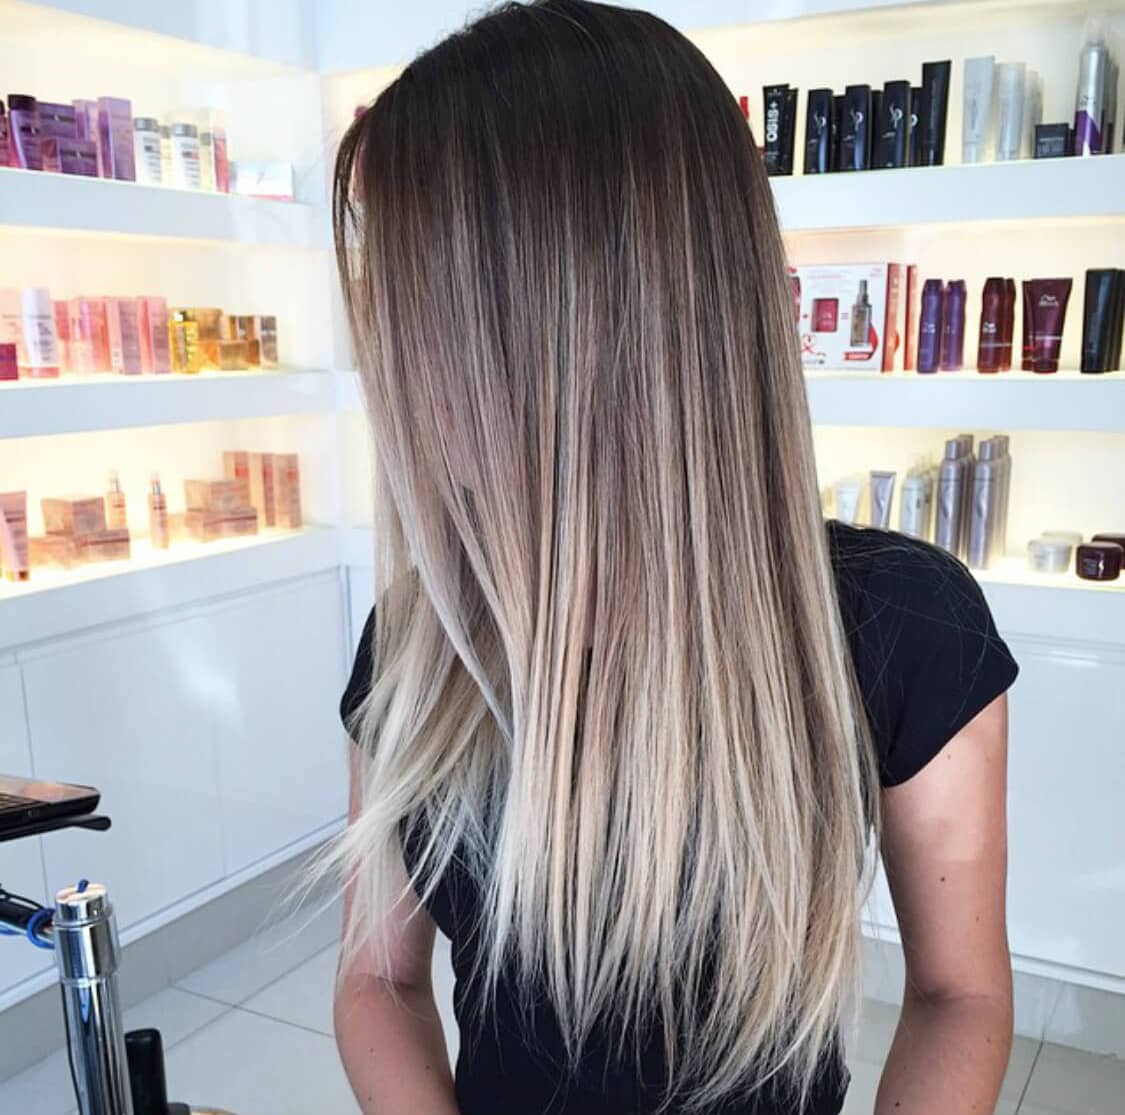 50 Beautiful Ombre Hairstyles